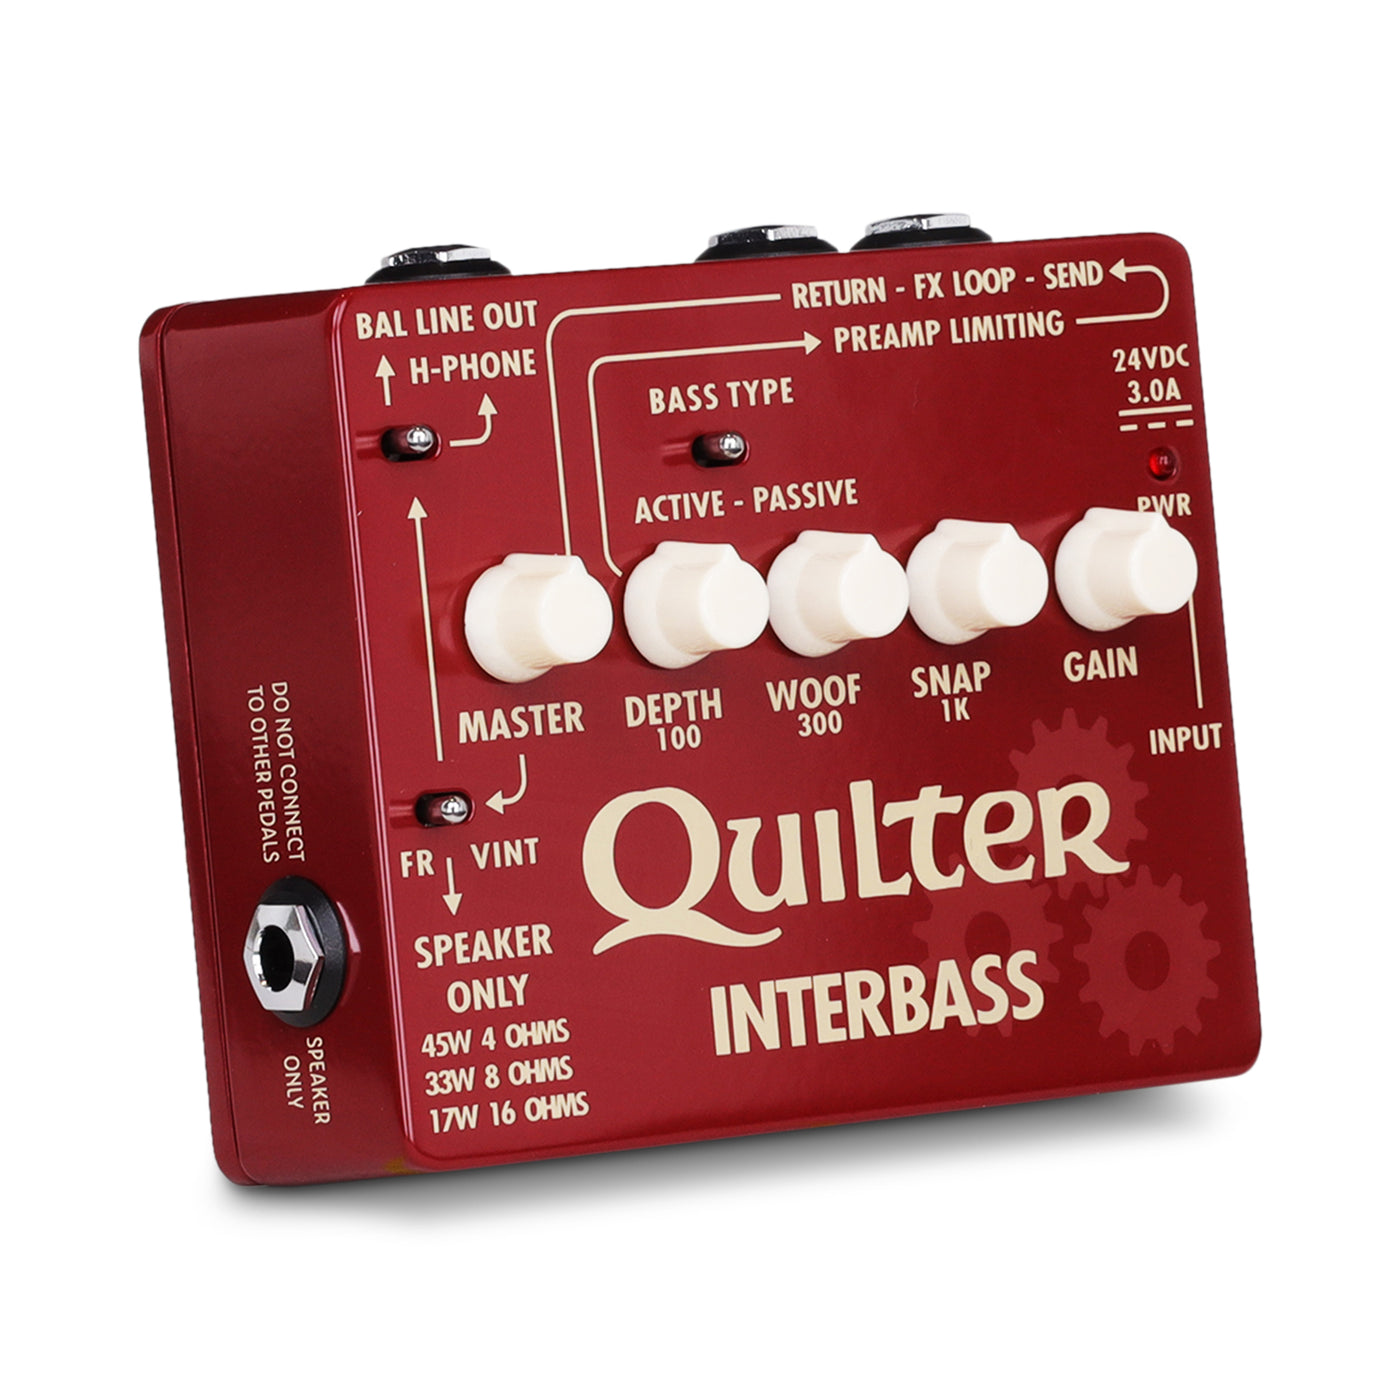 Quilter Labs Interbass Amplifier Head facing diagonally to the right